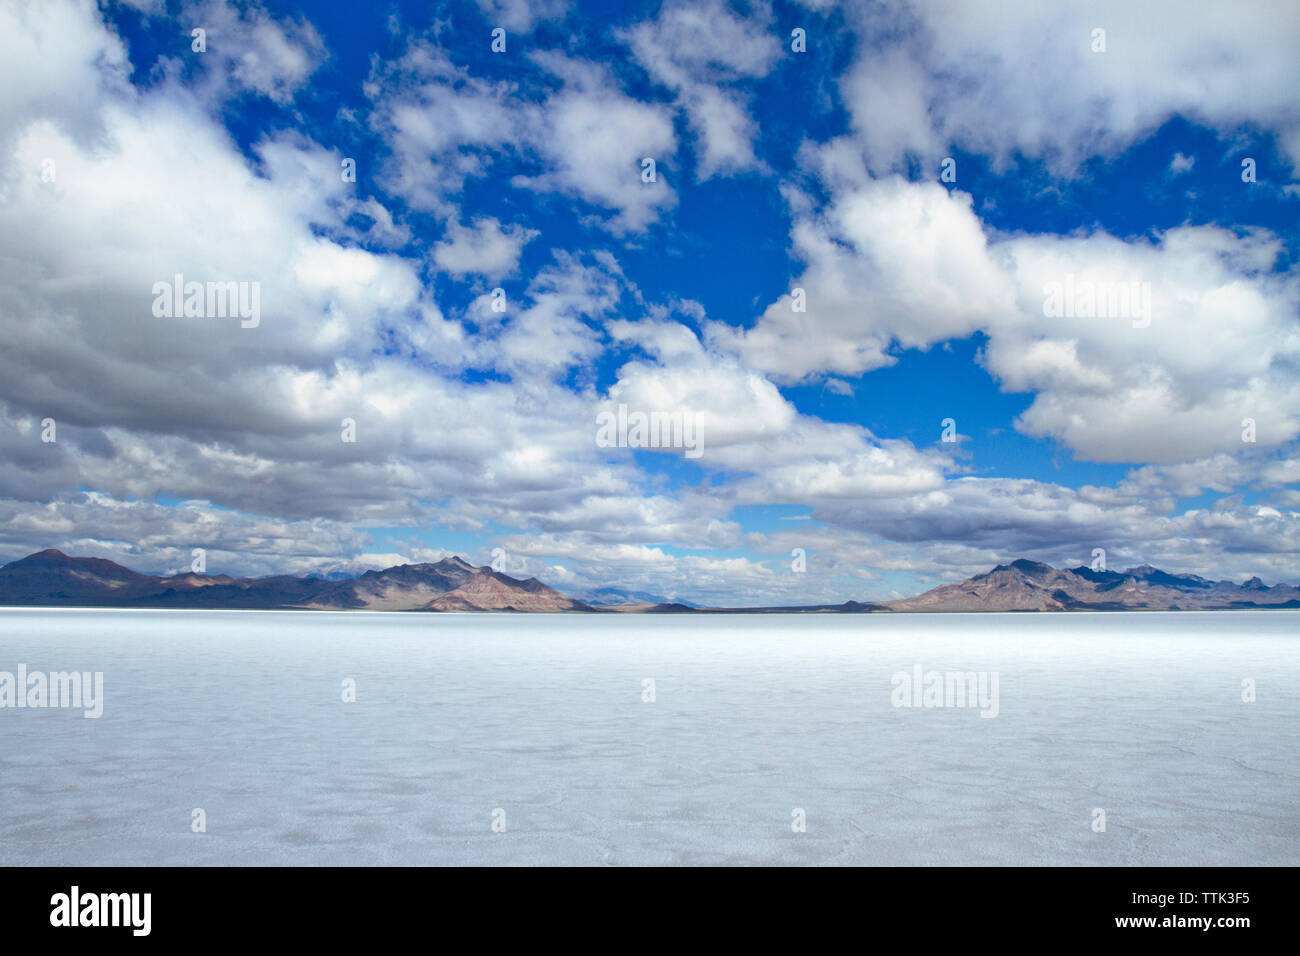 Scenic view of snowy field against cloudy sky Banque D'Images